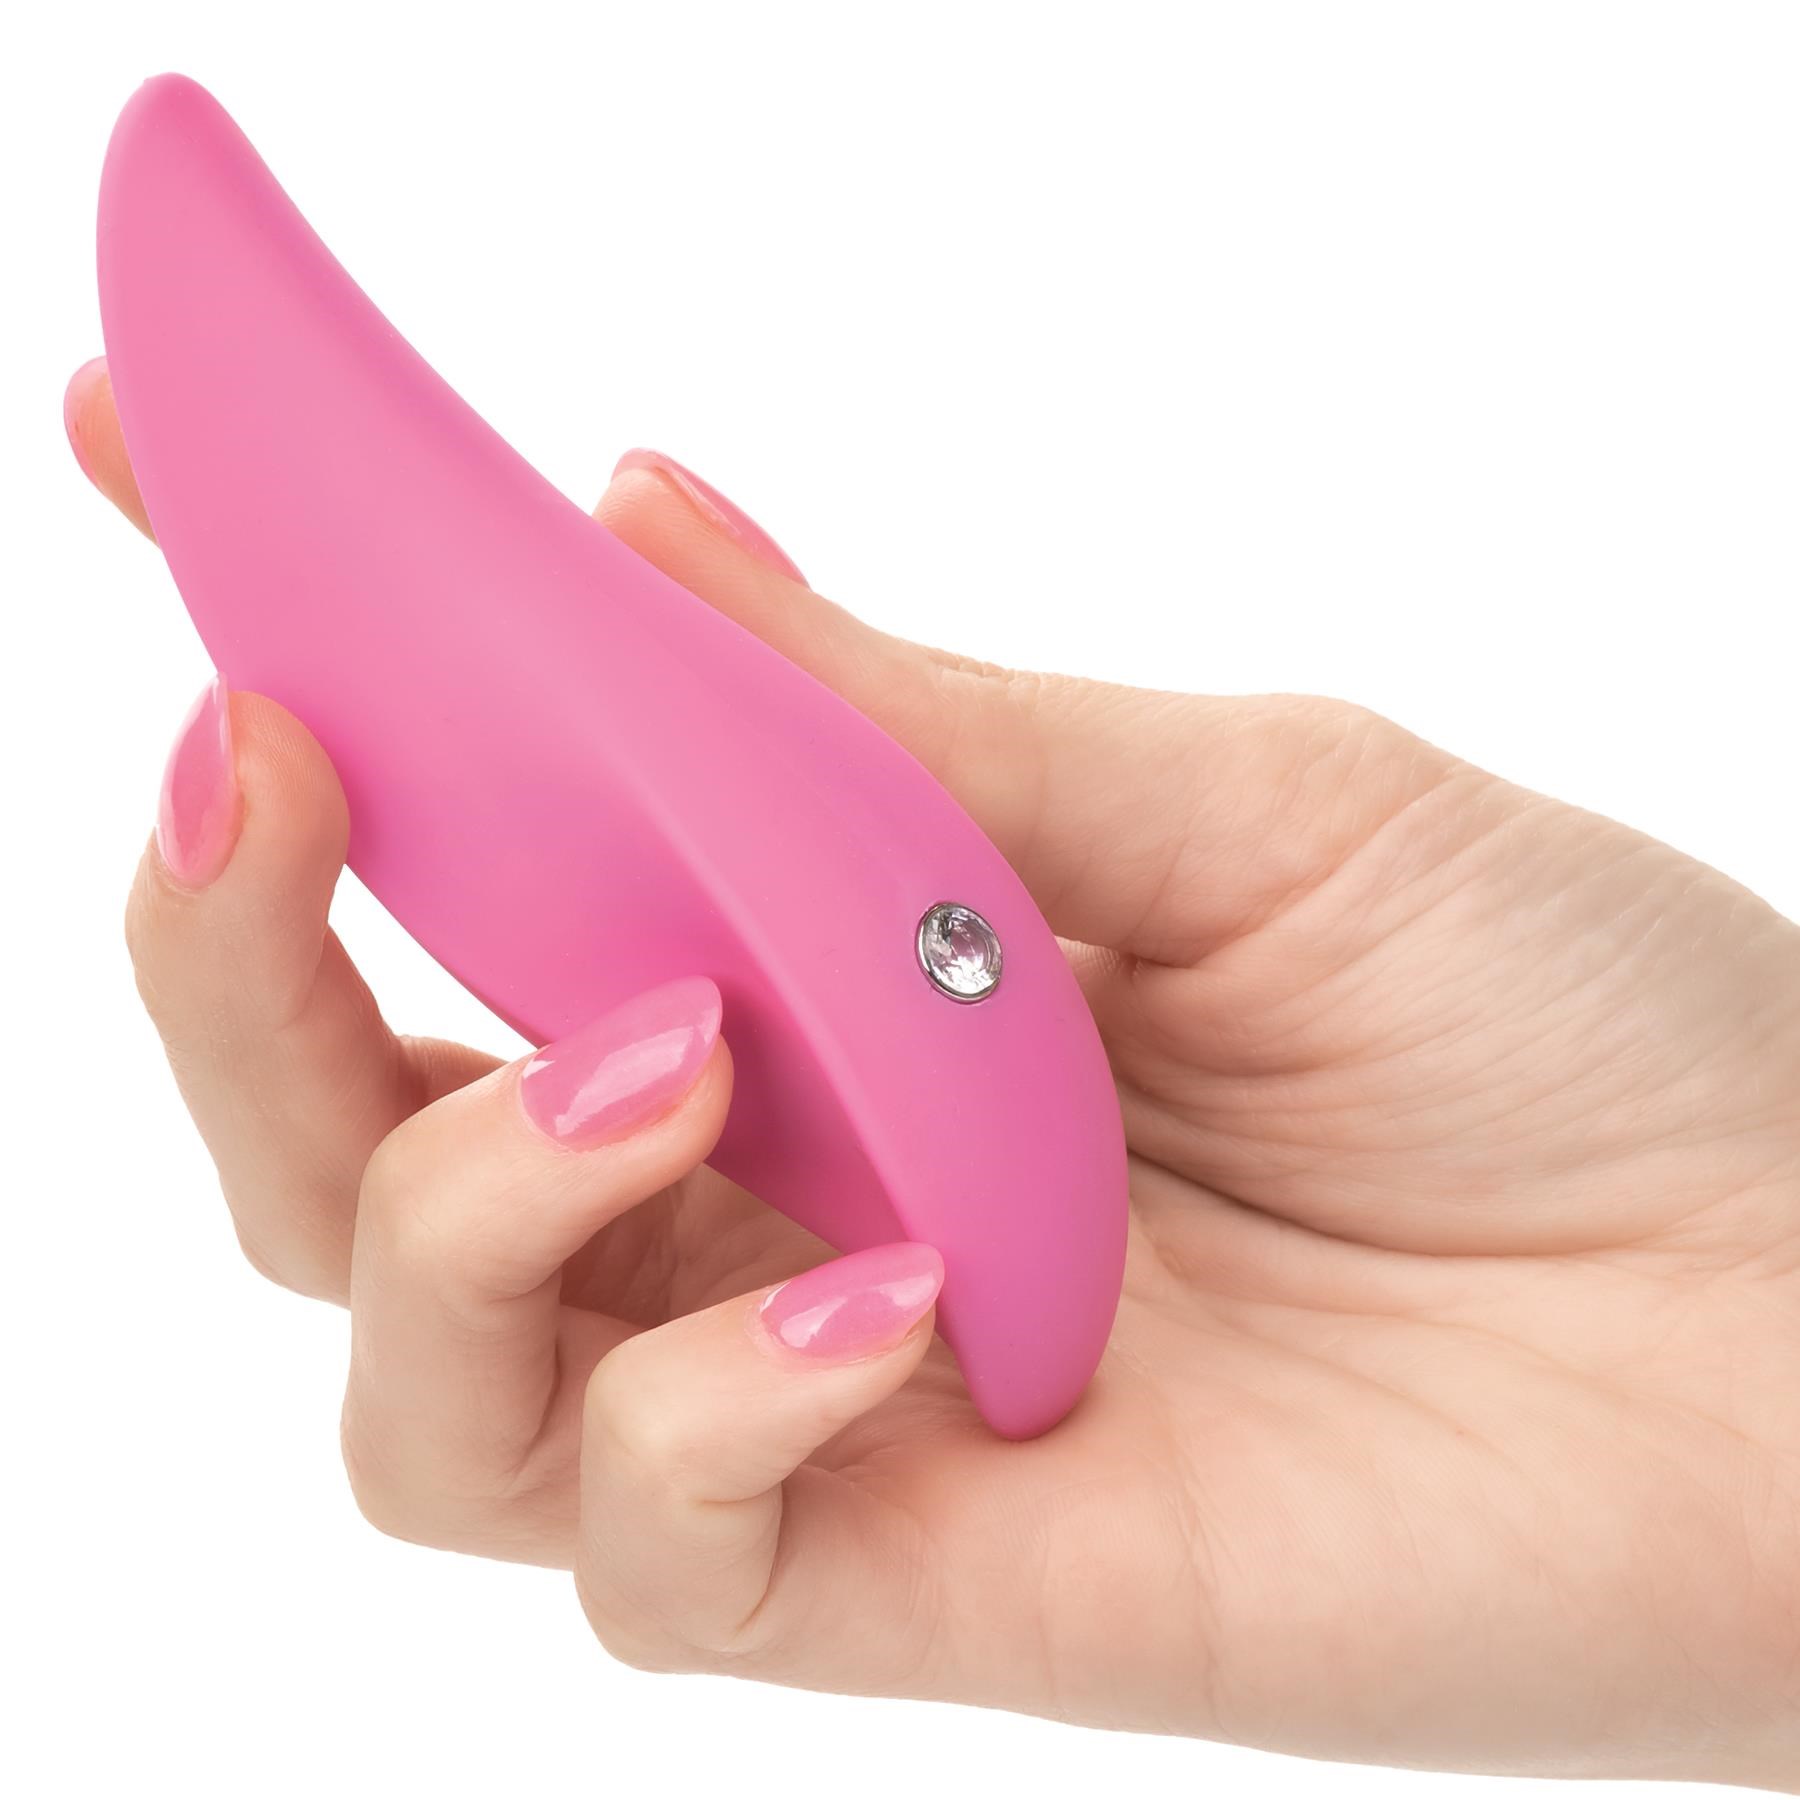 Luvmor Foreplay Finger Vibrator - Hand Shot to Show Size